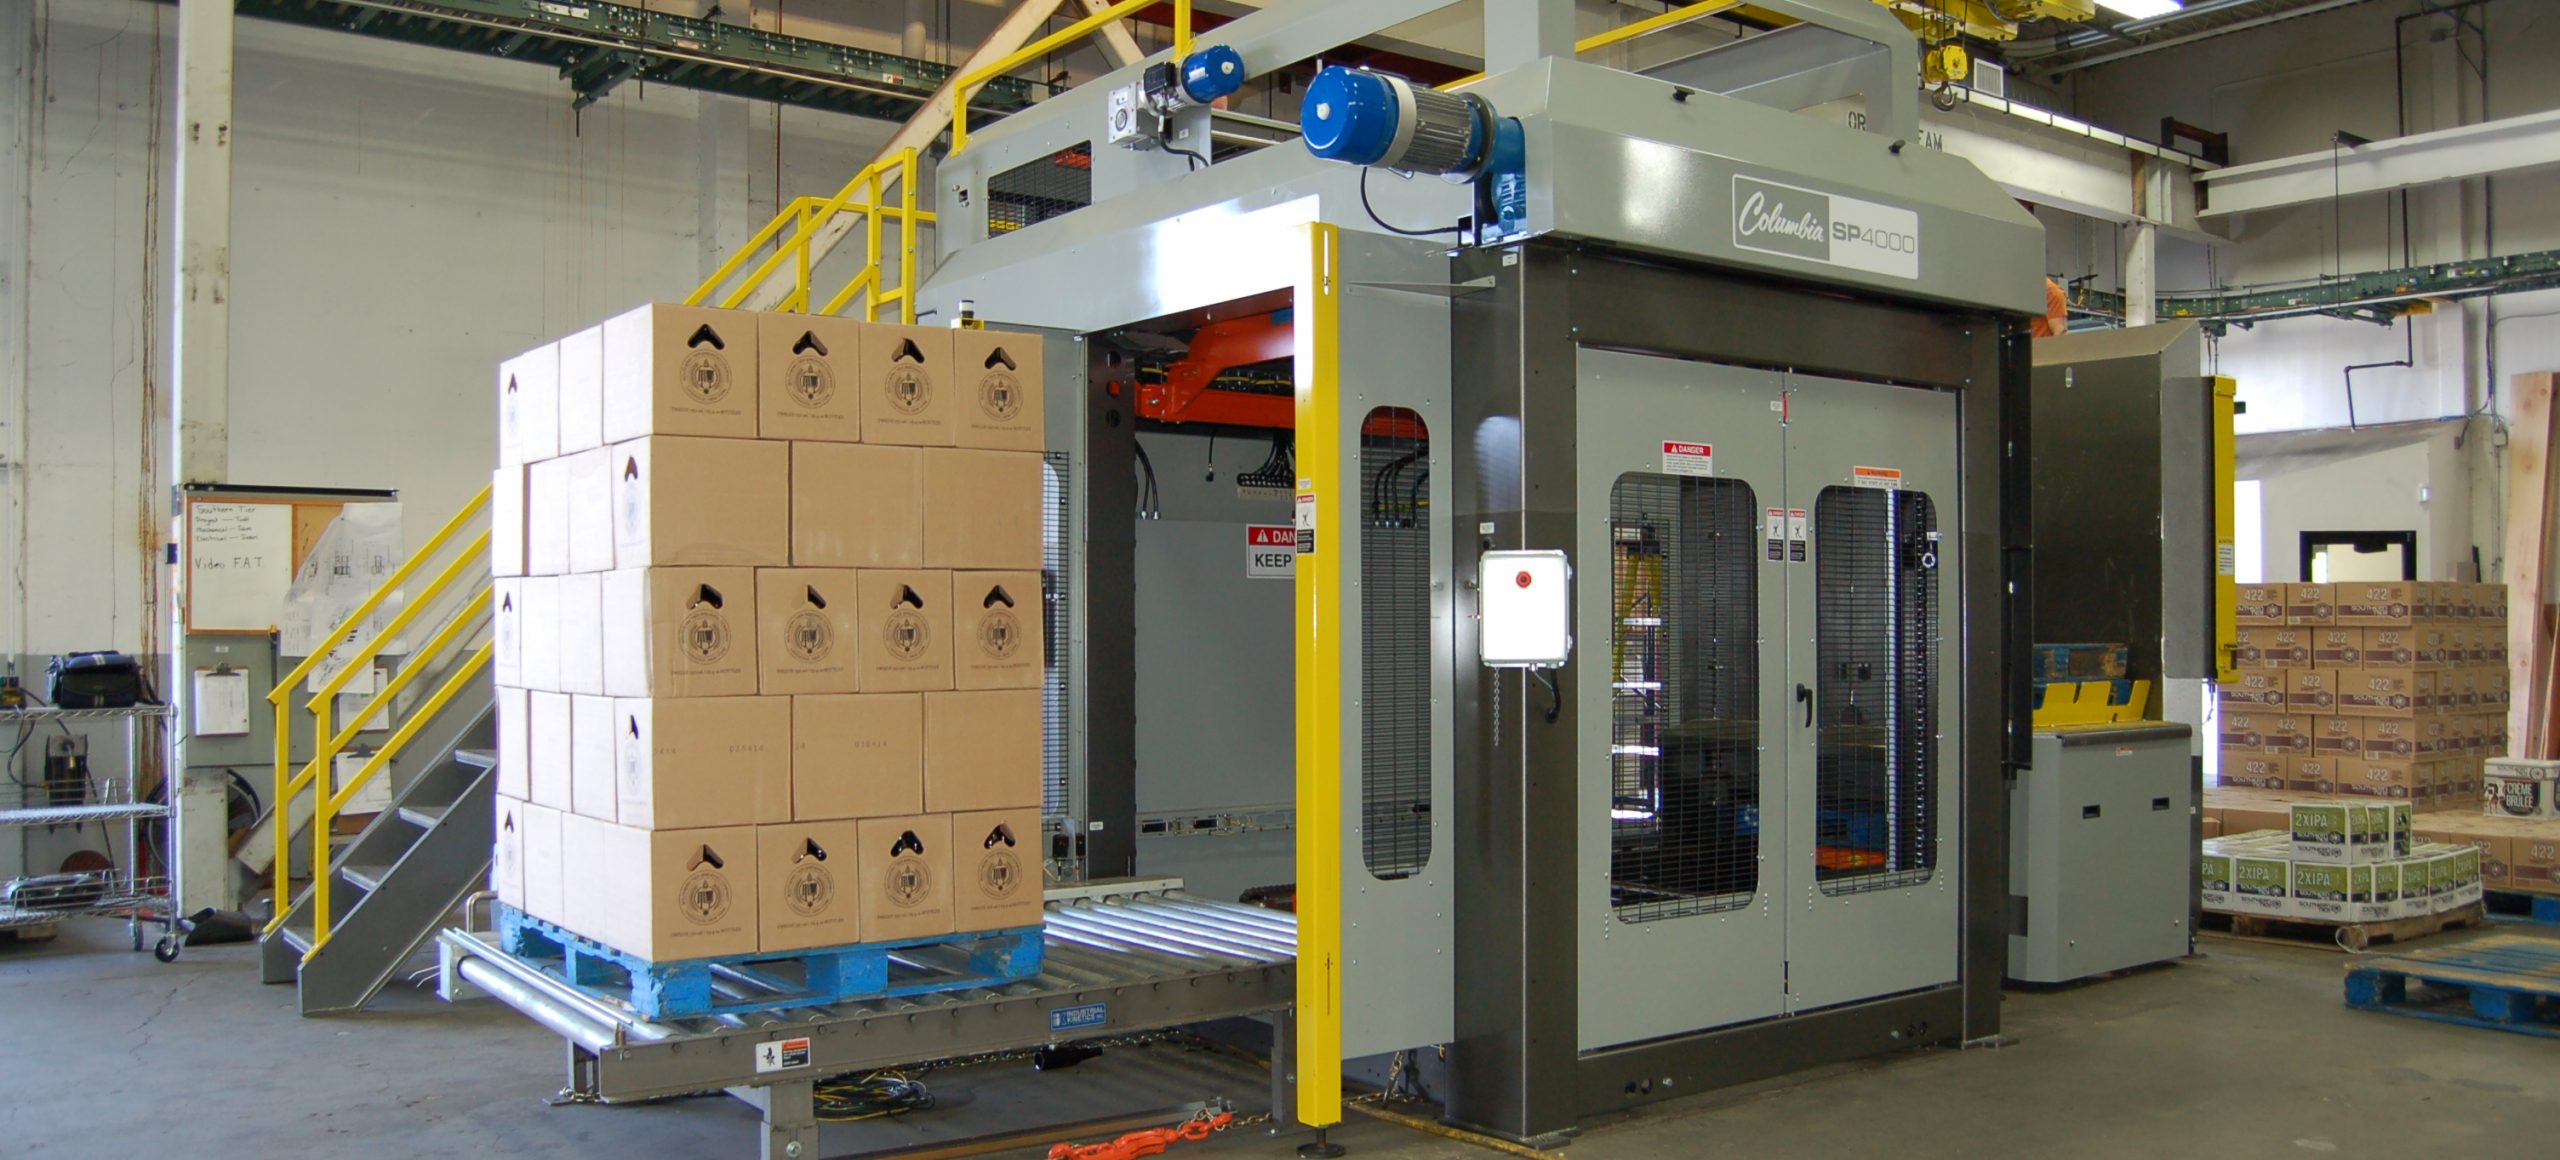 Image of a SP400 high level palletizer.